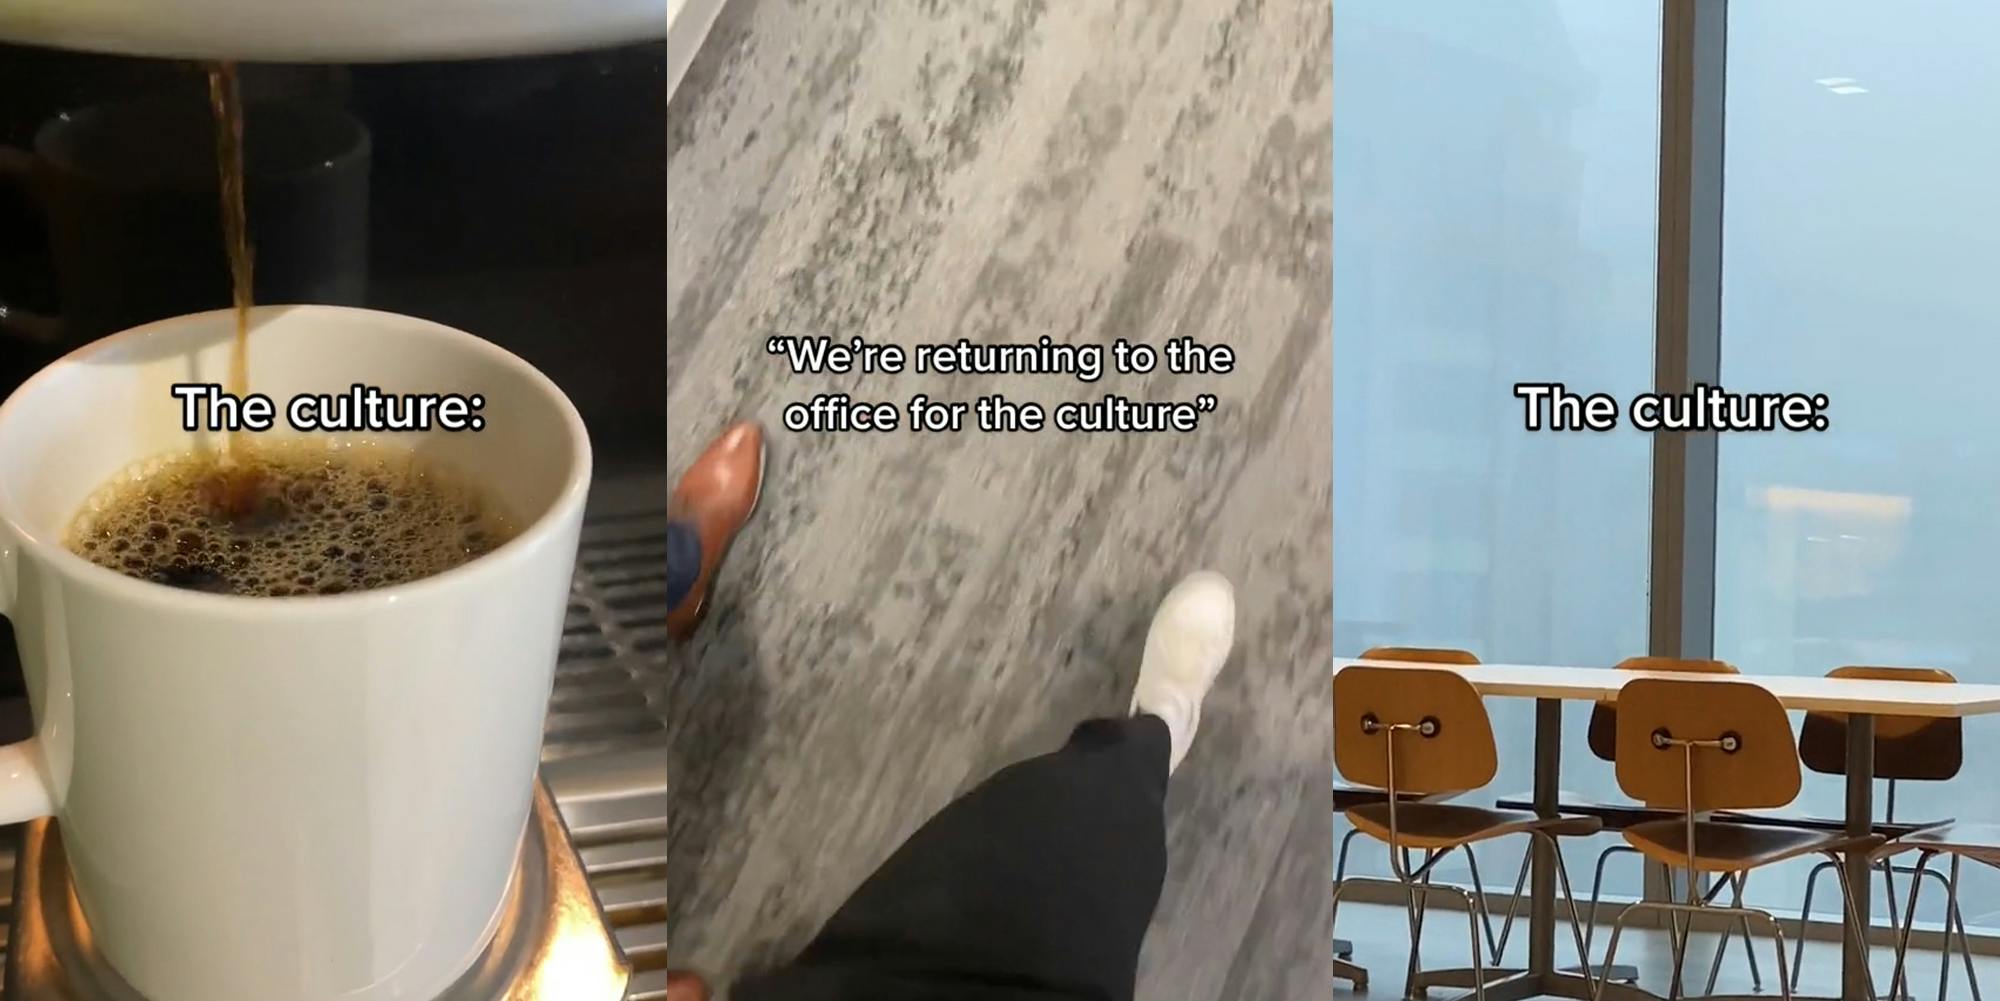 coffee machine pouring fresh coffee into mug with caption "The culture:" (l) people walking on carpet with caption ""We're returning to the office for the culture"" (c) window with empty chairs and table and caption "The culture:" (r)